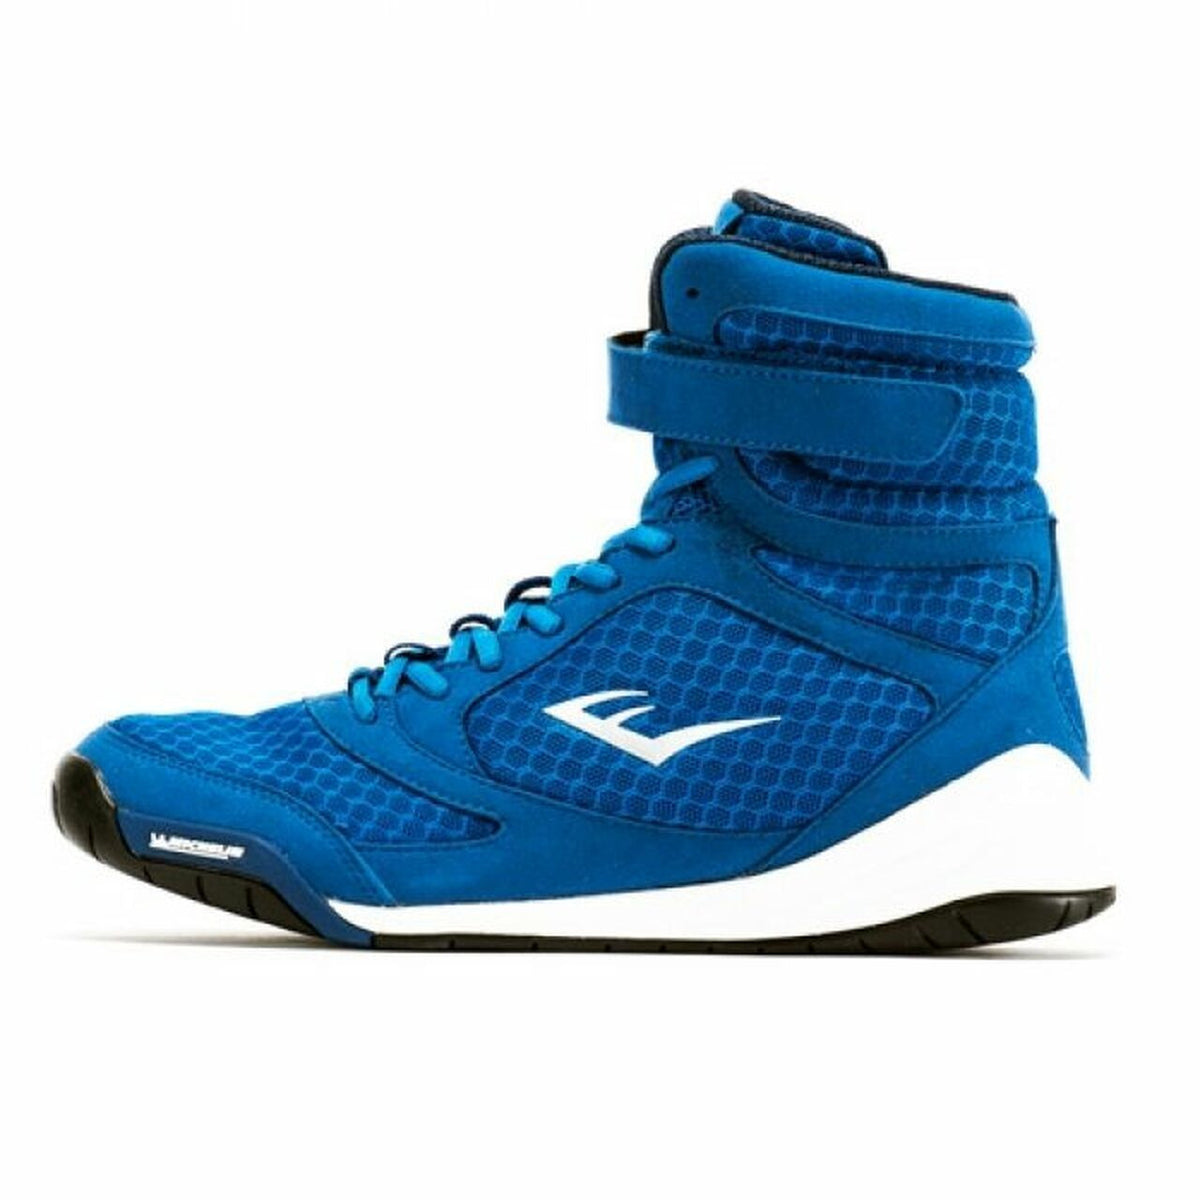 Elite High Top Boxing Shoes